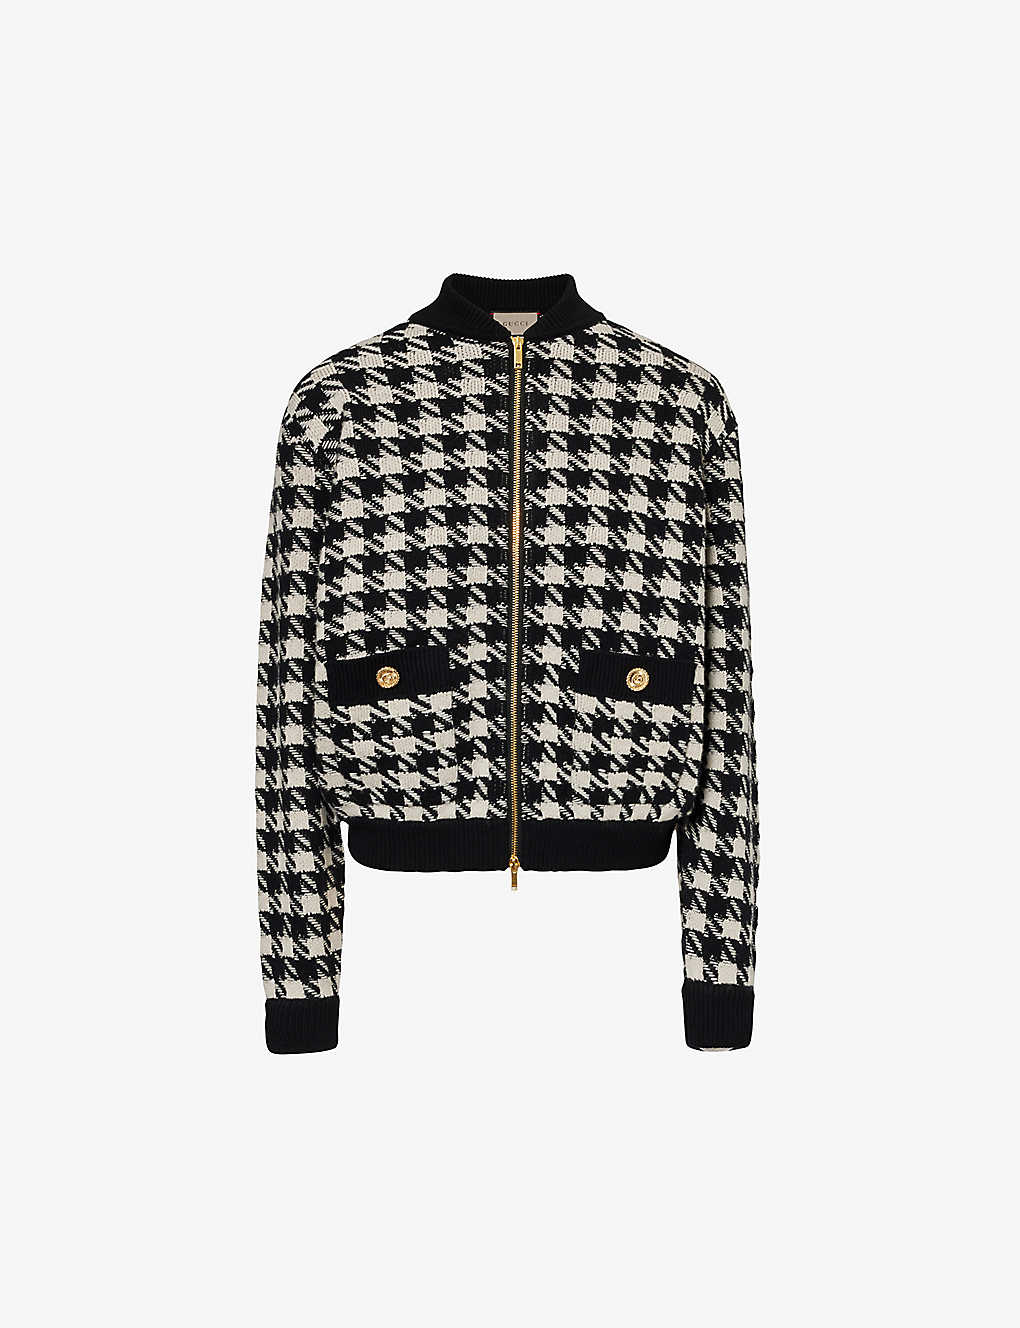 Gucci Houndstooth Bomber Jacket In Black